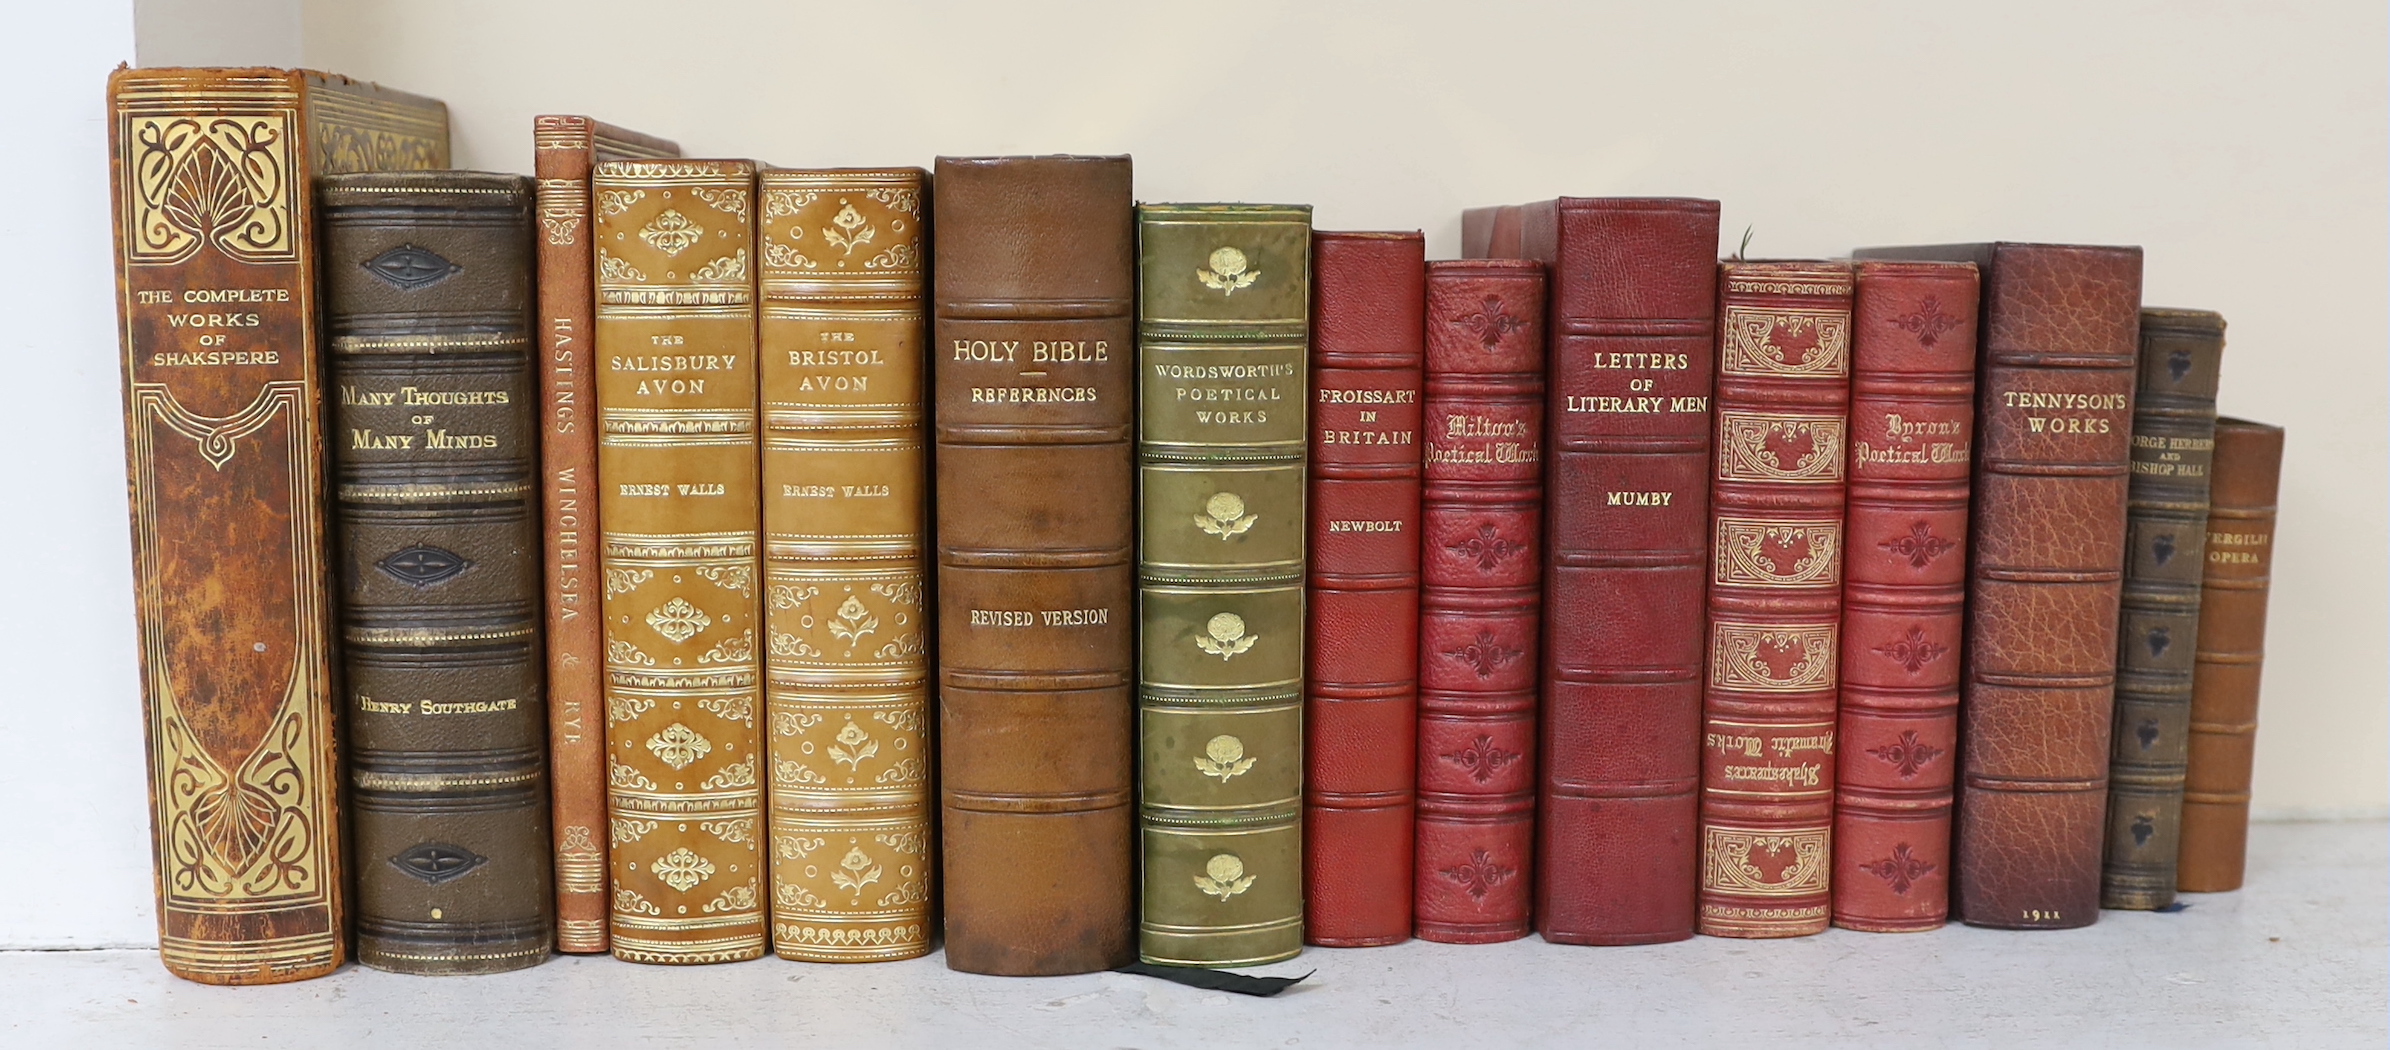 Morocco bindings - 11 vols, later 19th / earlier 20th century; together with Walls, Ernest - The Avon Series (The Bristol, Salisbury, Shakespeare's), 3 vols, plates and other illus. (by R.E.J. Bush)